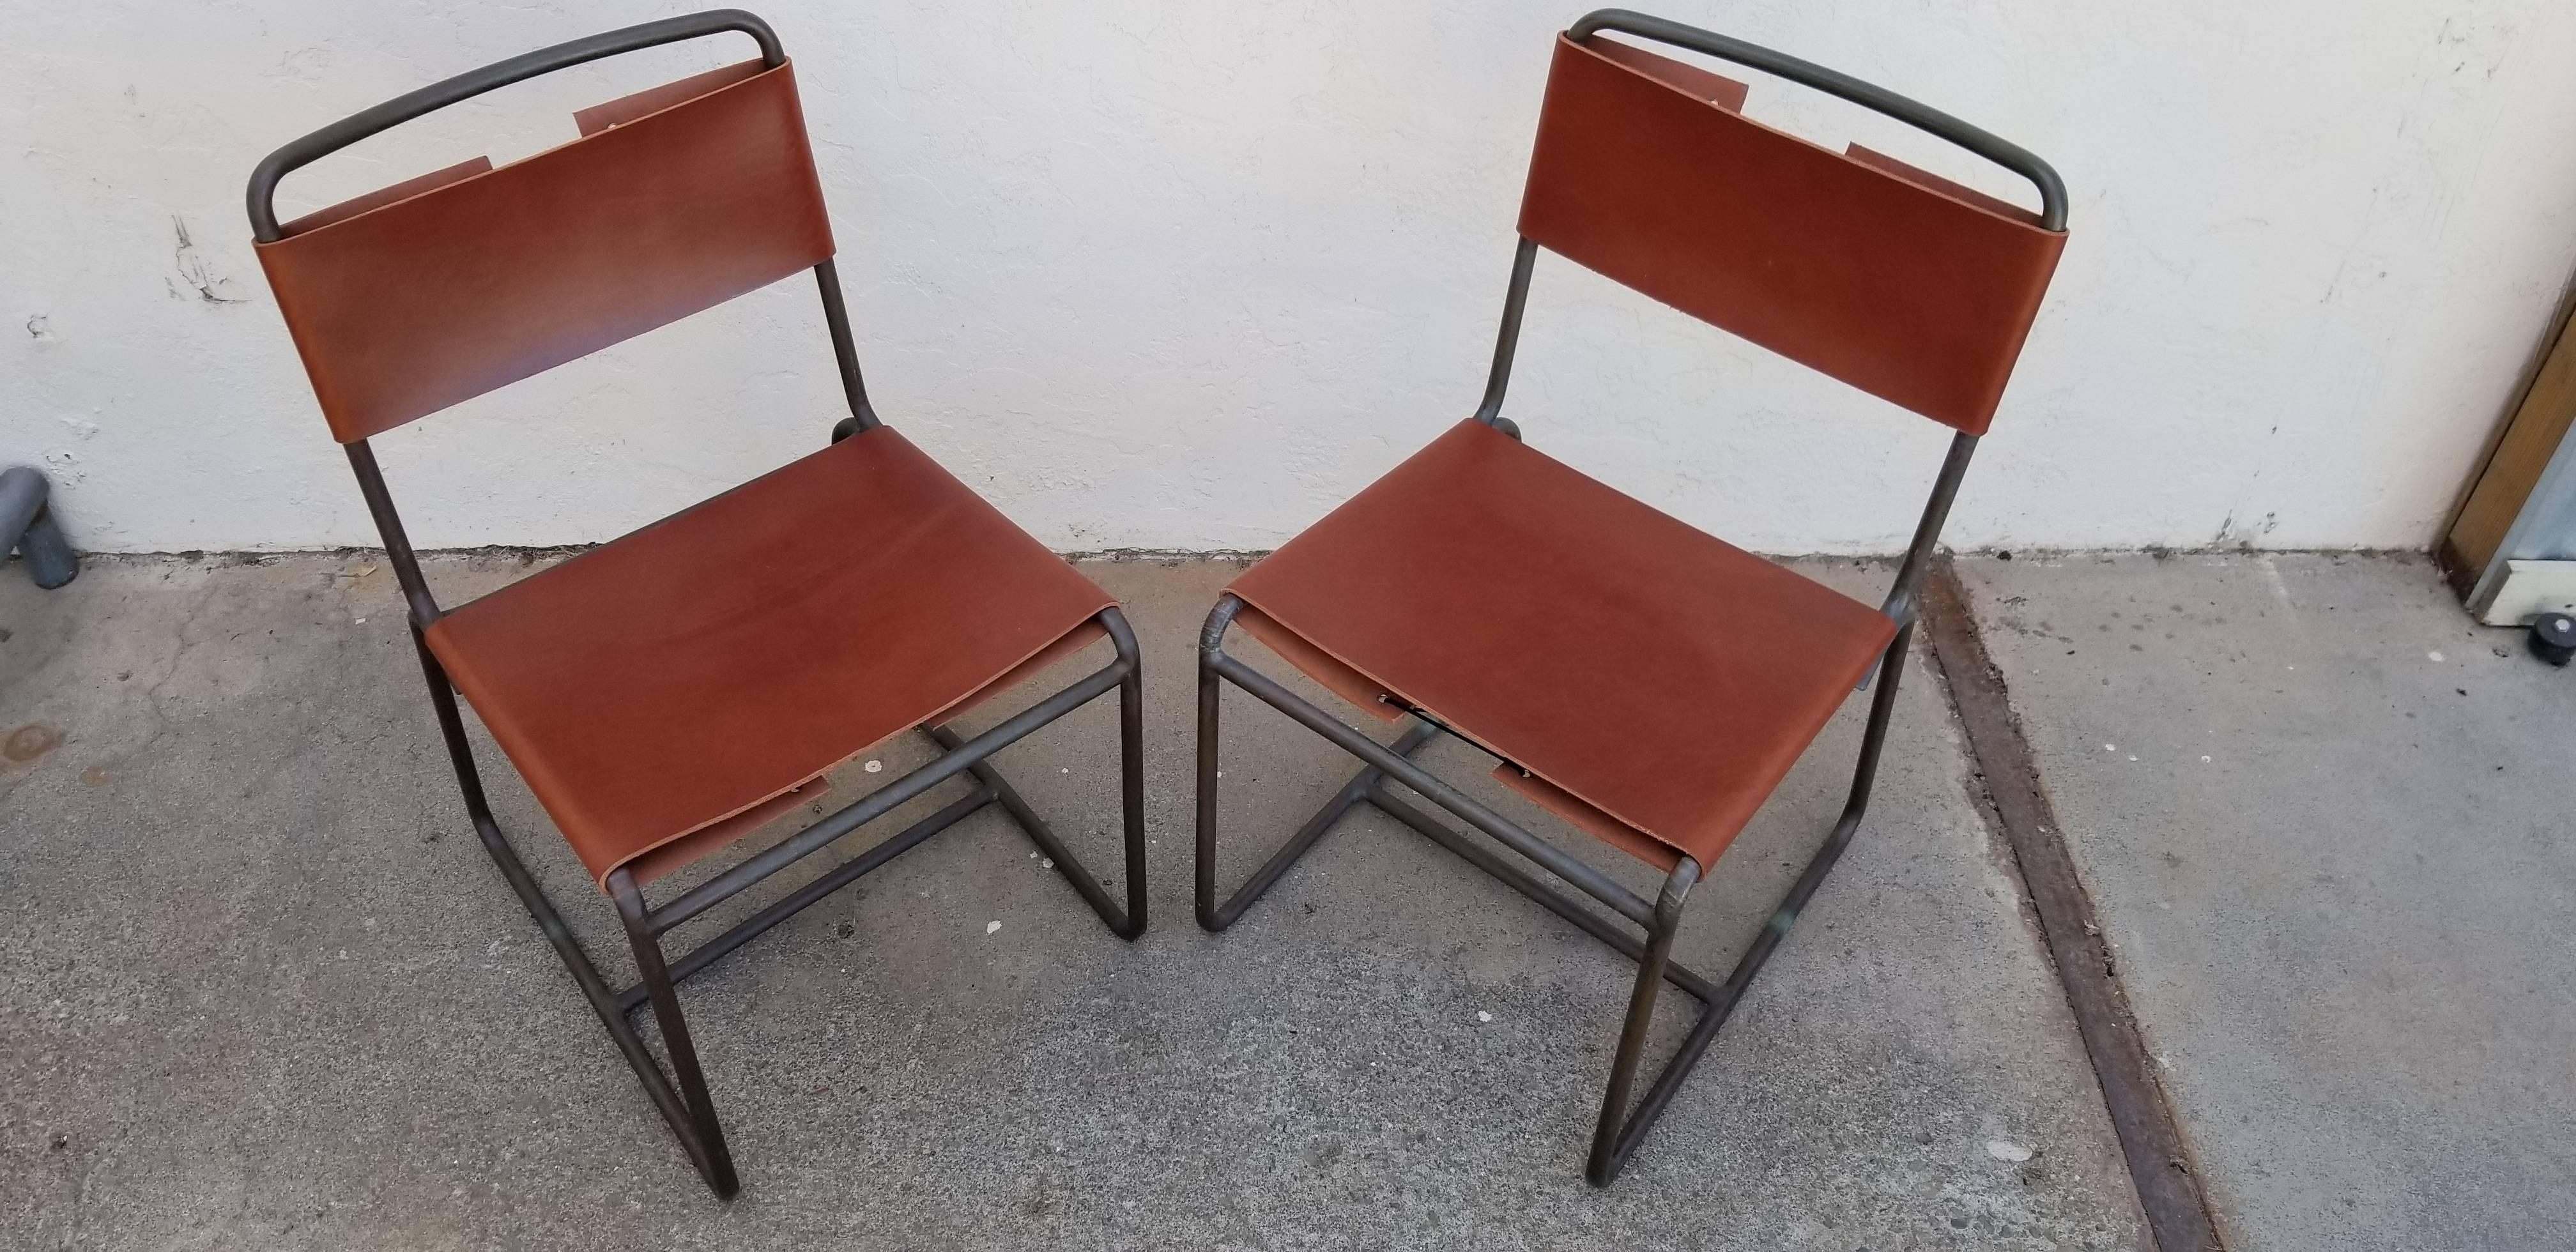 A pair of bronze and leather side or dining chairs by Walter Lamb. Unique and atypical sling style upholstery in hide leather with adjustable riveted ties. Beautiful patina to bronze frames.